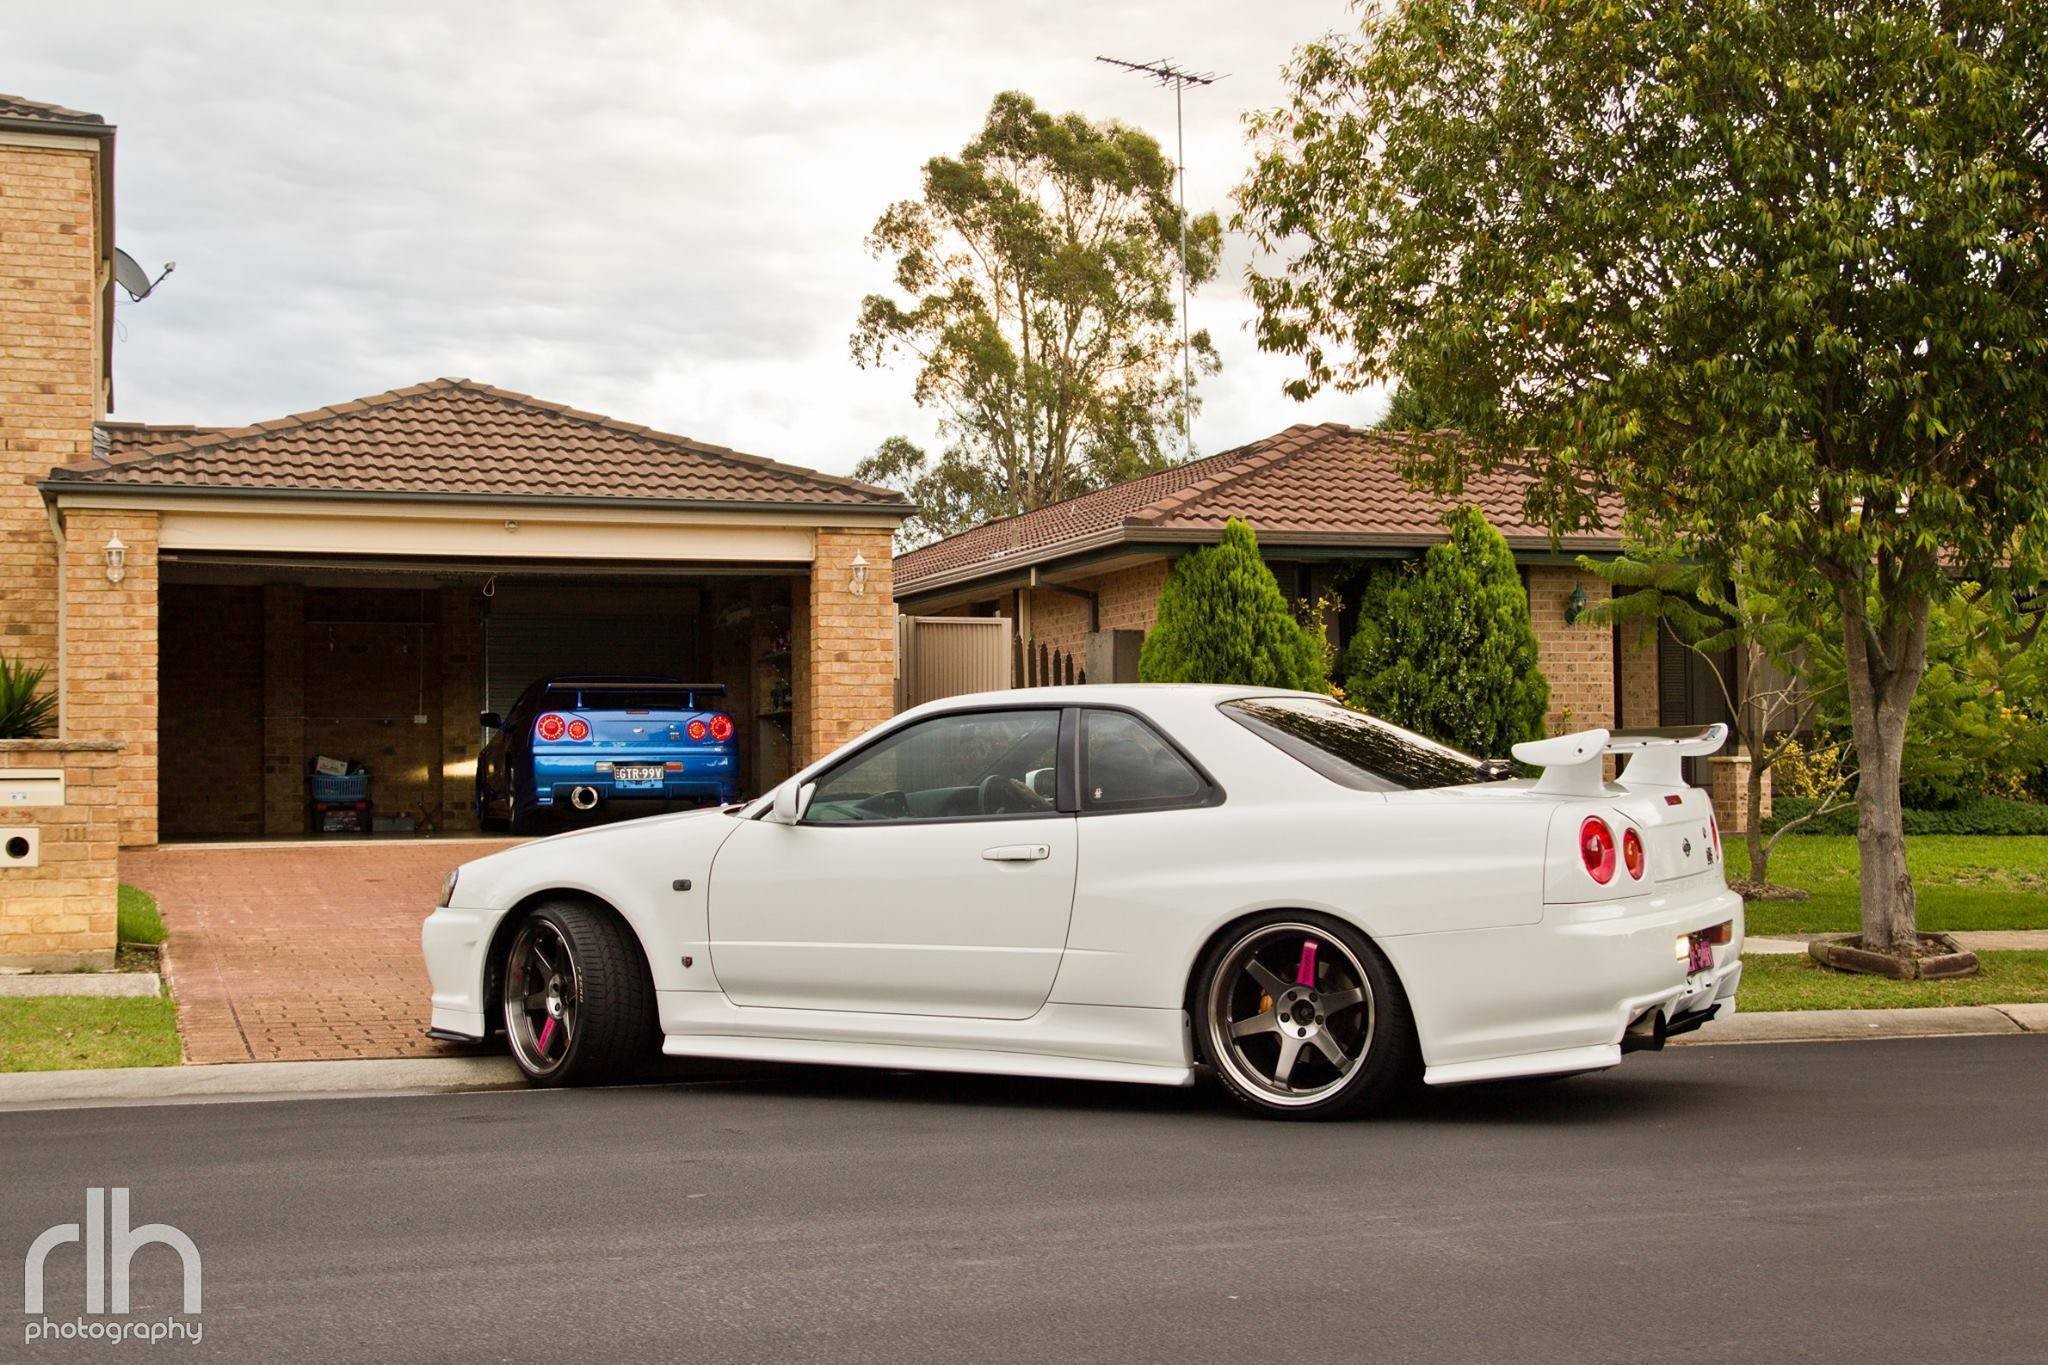 General 2048x1365 Nissan Nissan Skyline R34 garage white cars vehicle Nissan Skyline Japanese cars car side view taillights trees house sky overcast clouds